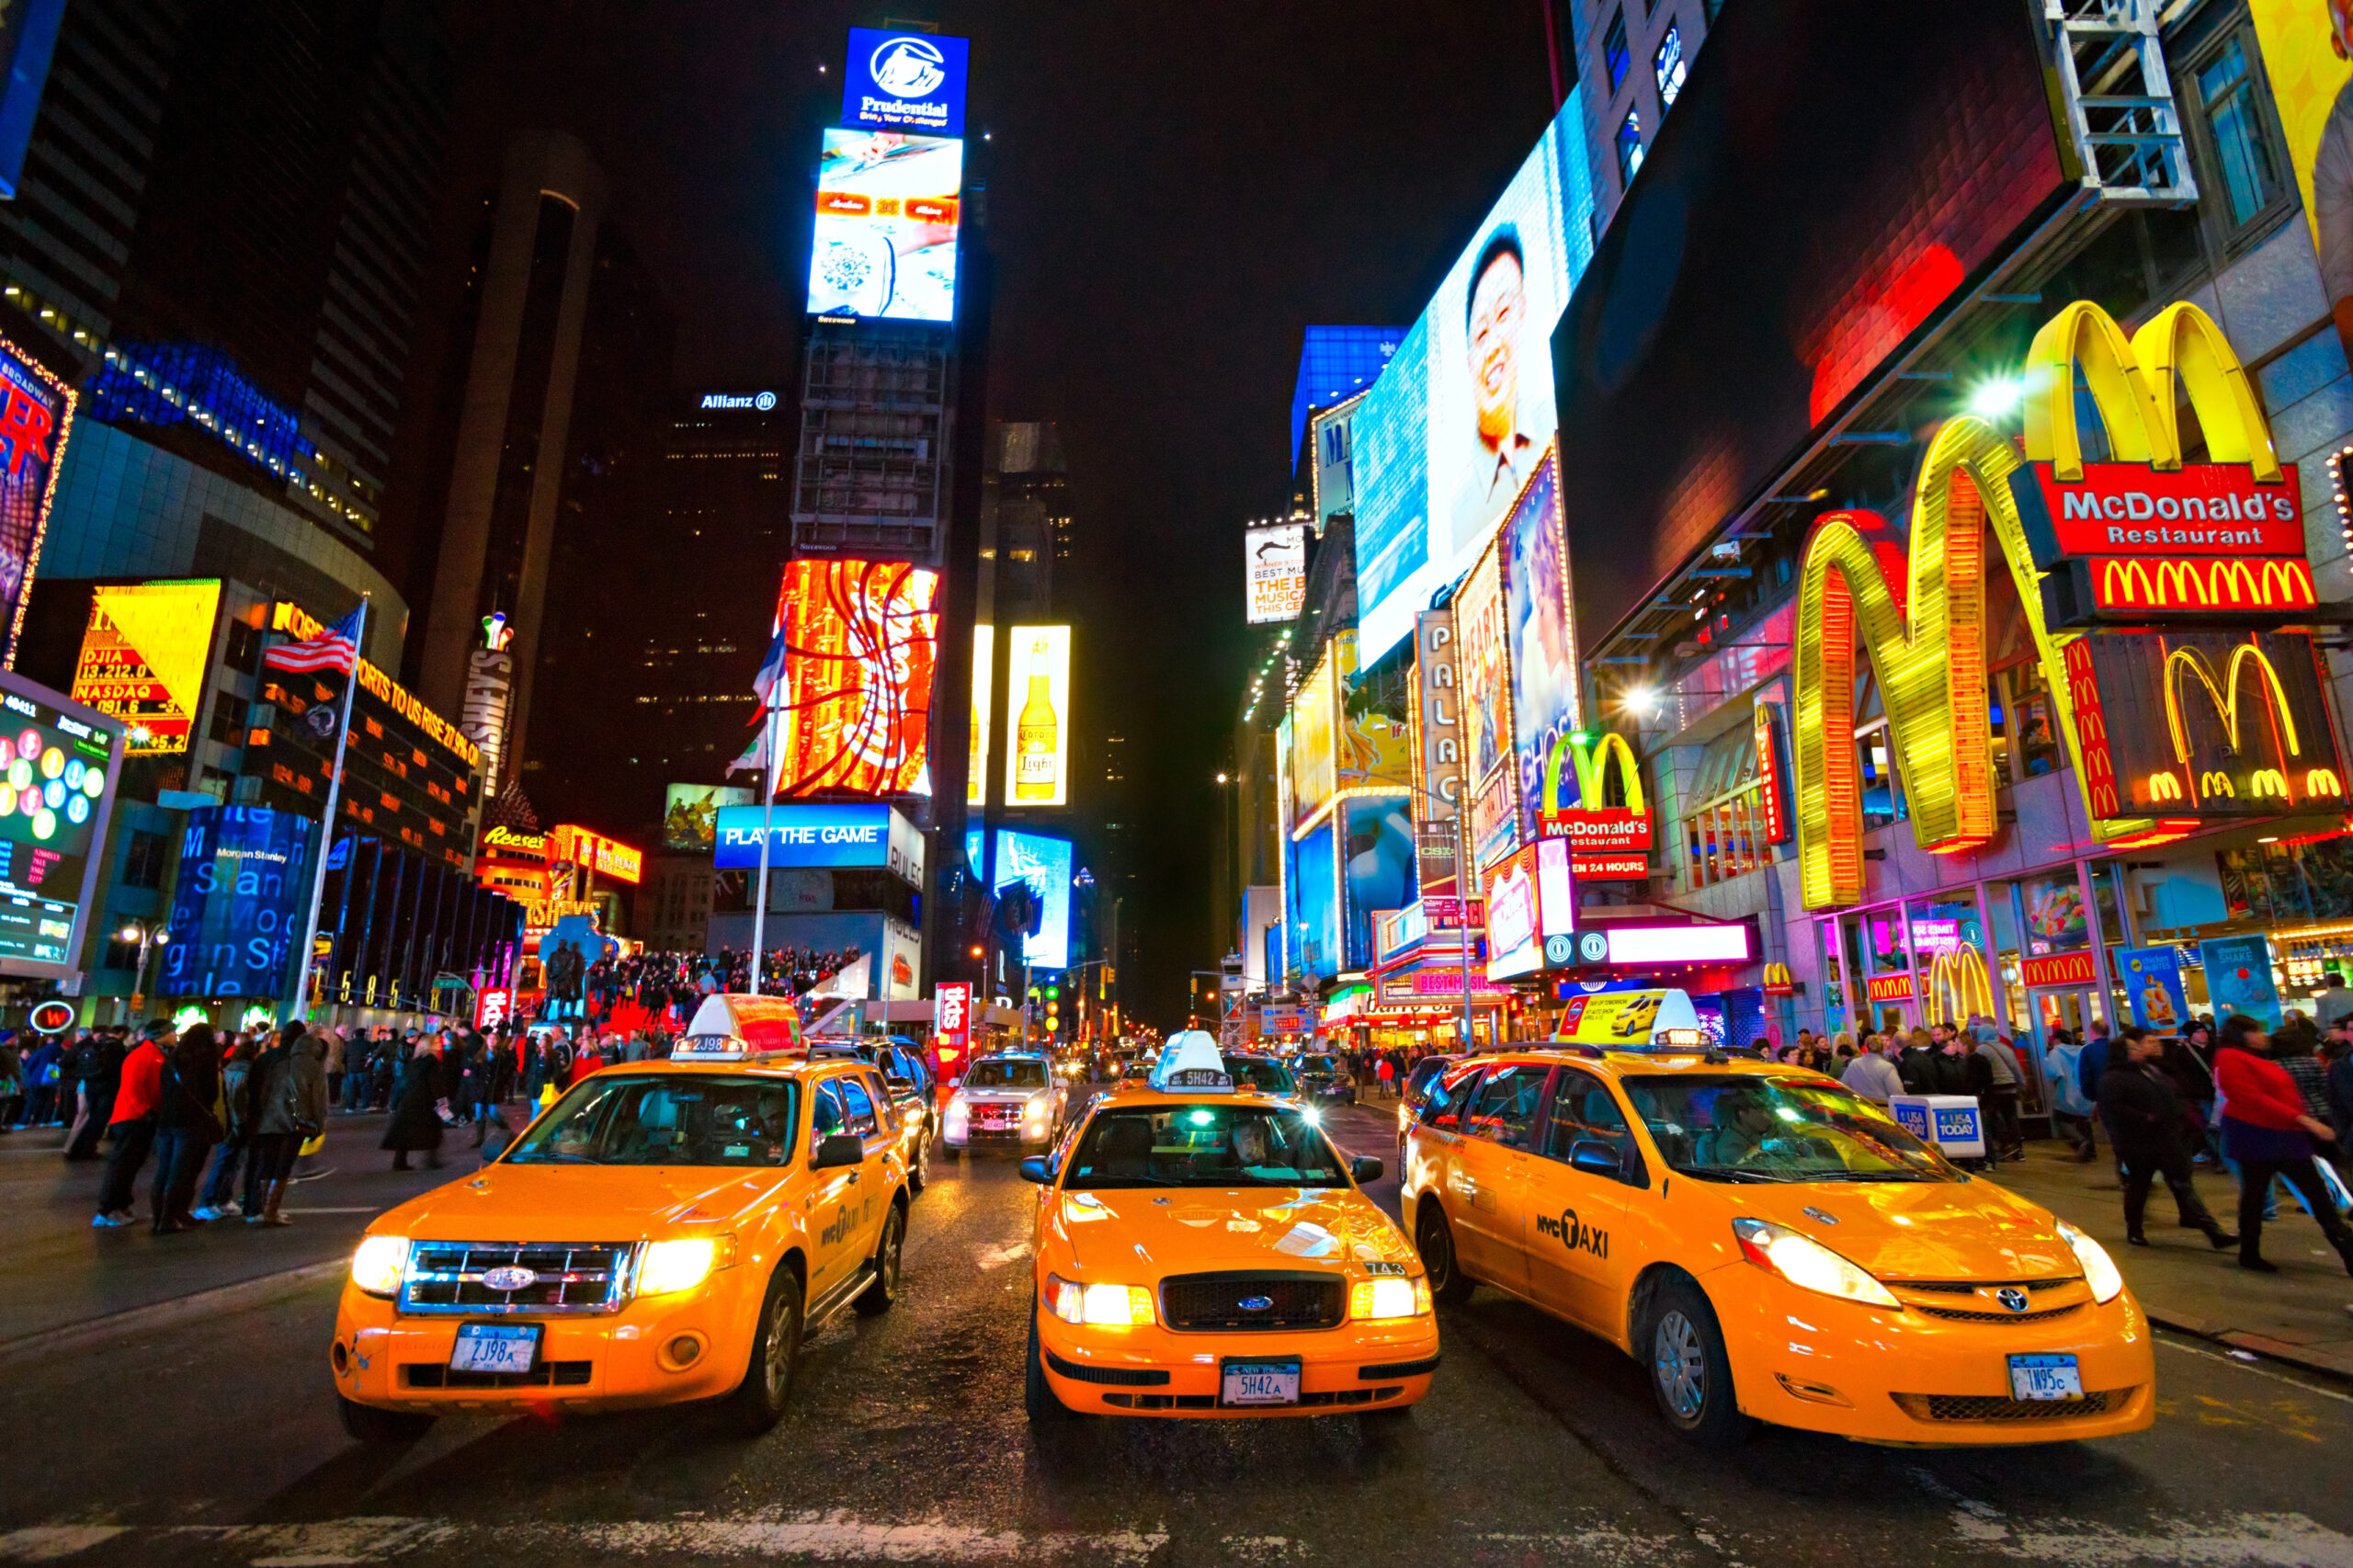 3. Times Square, New York City